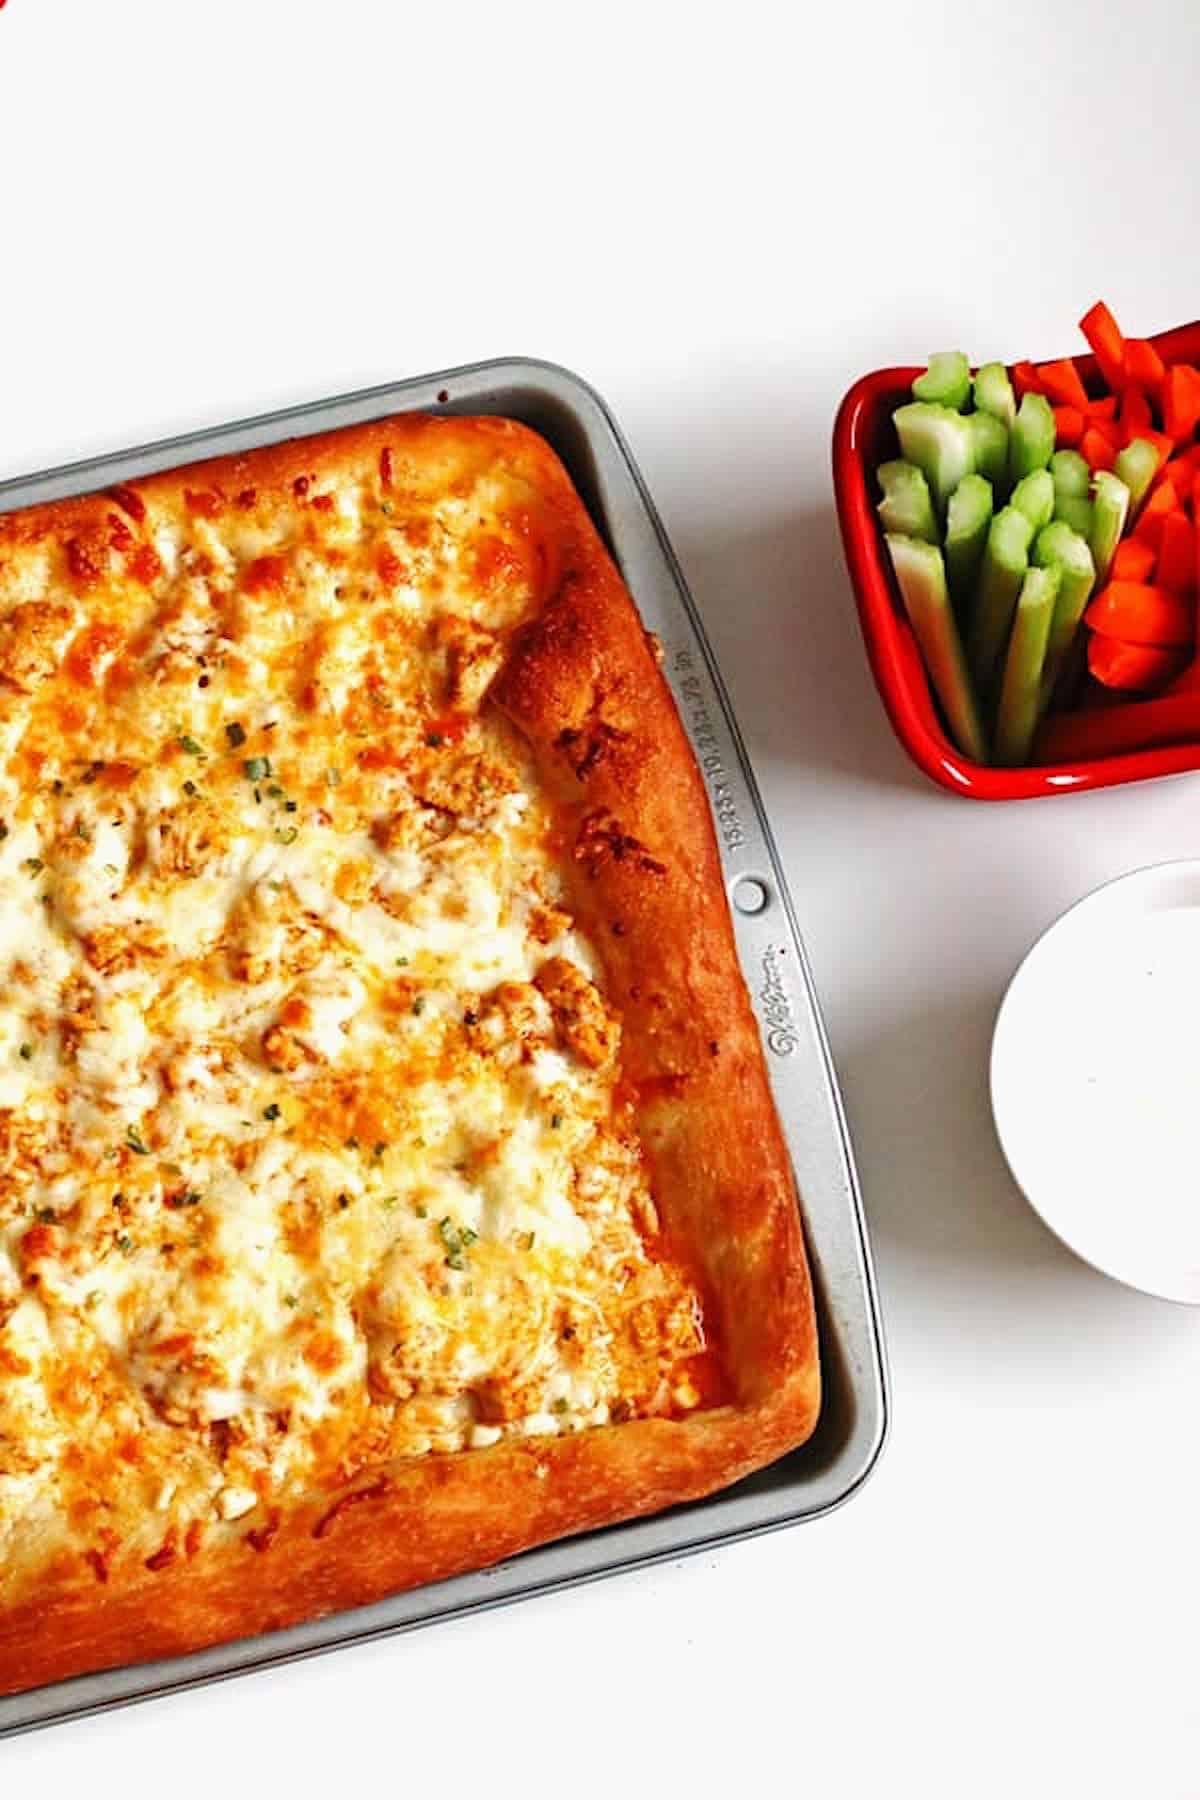 Buffalo Chicken Pizza in baking pan with carrots, celery and blue cheese dressing on the side.